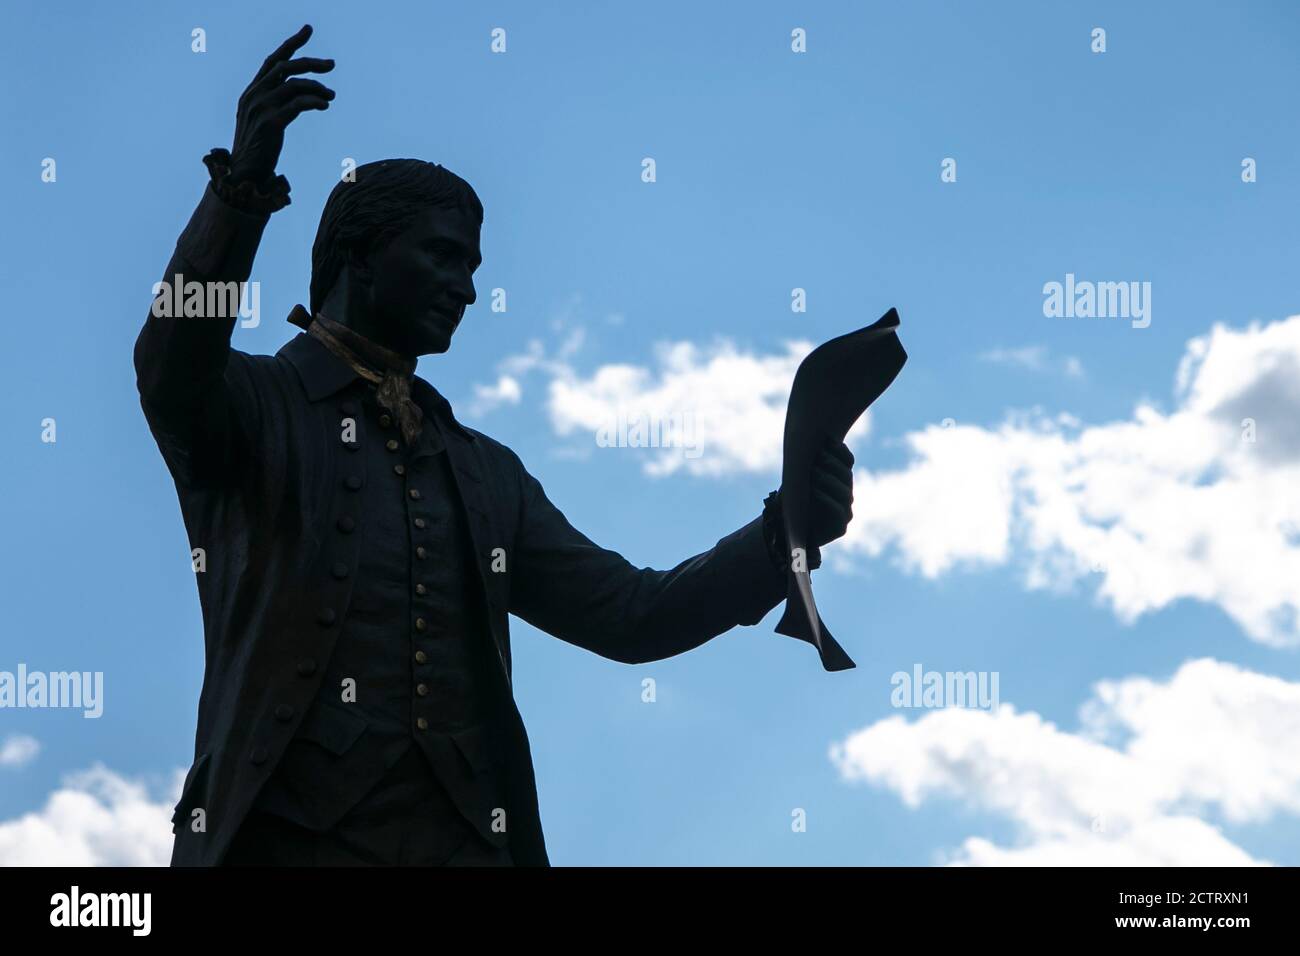 Silhouette of tall bronze statue, depicting the historic public reading of the Declaration of Independence by Colonel John Neilson on July 9, 1776. Stock Photo